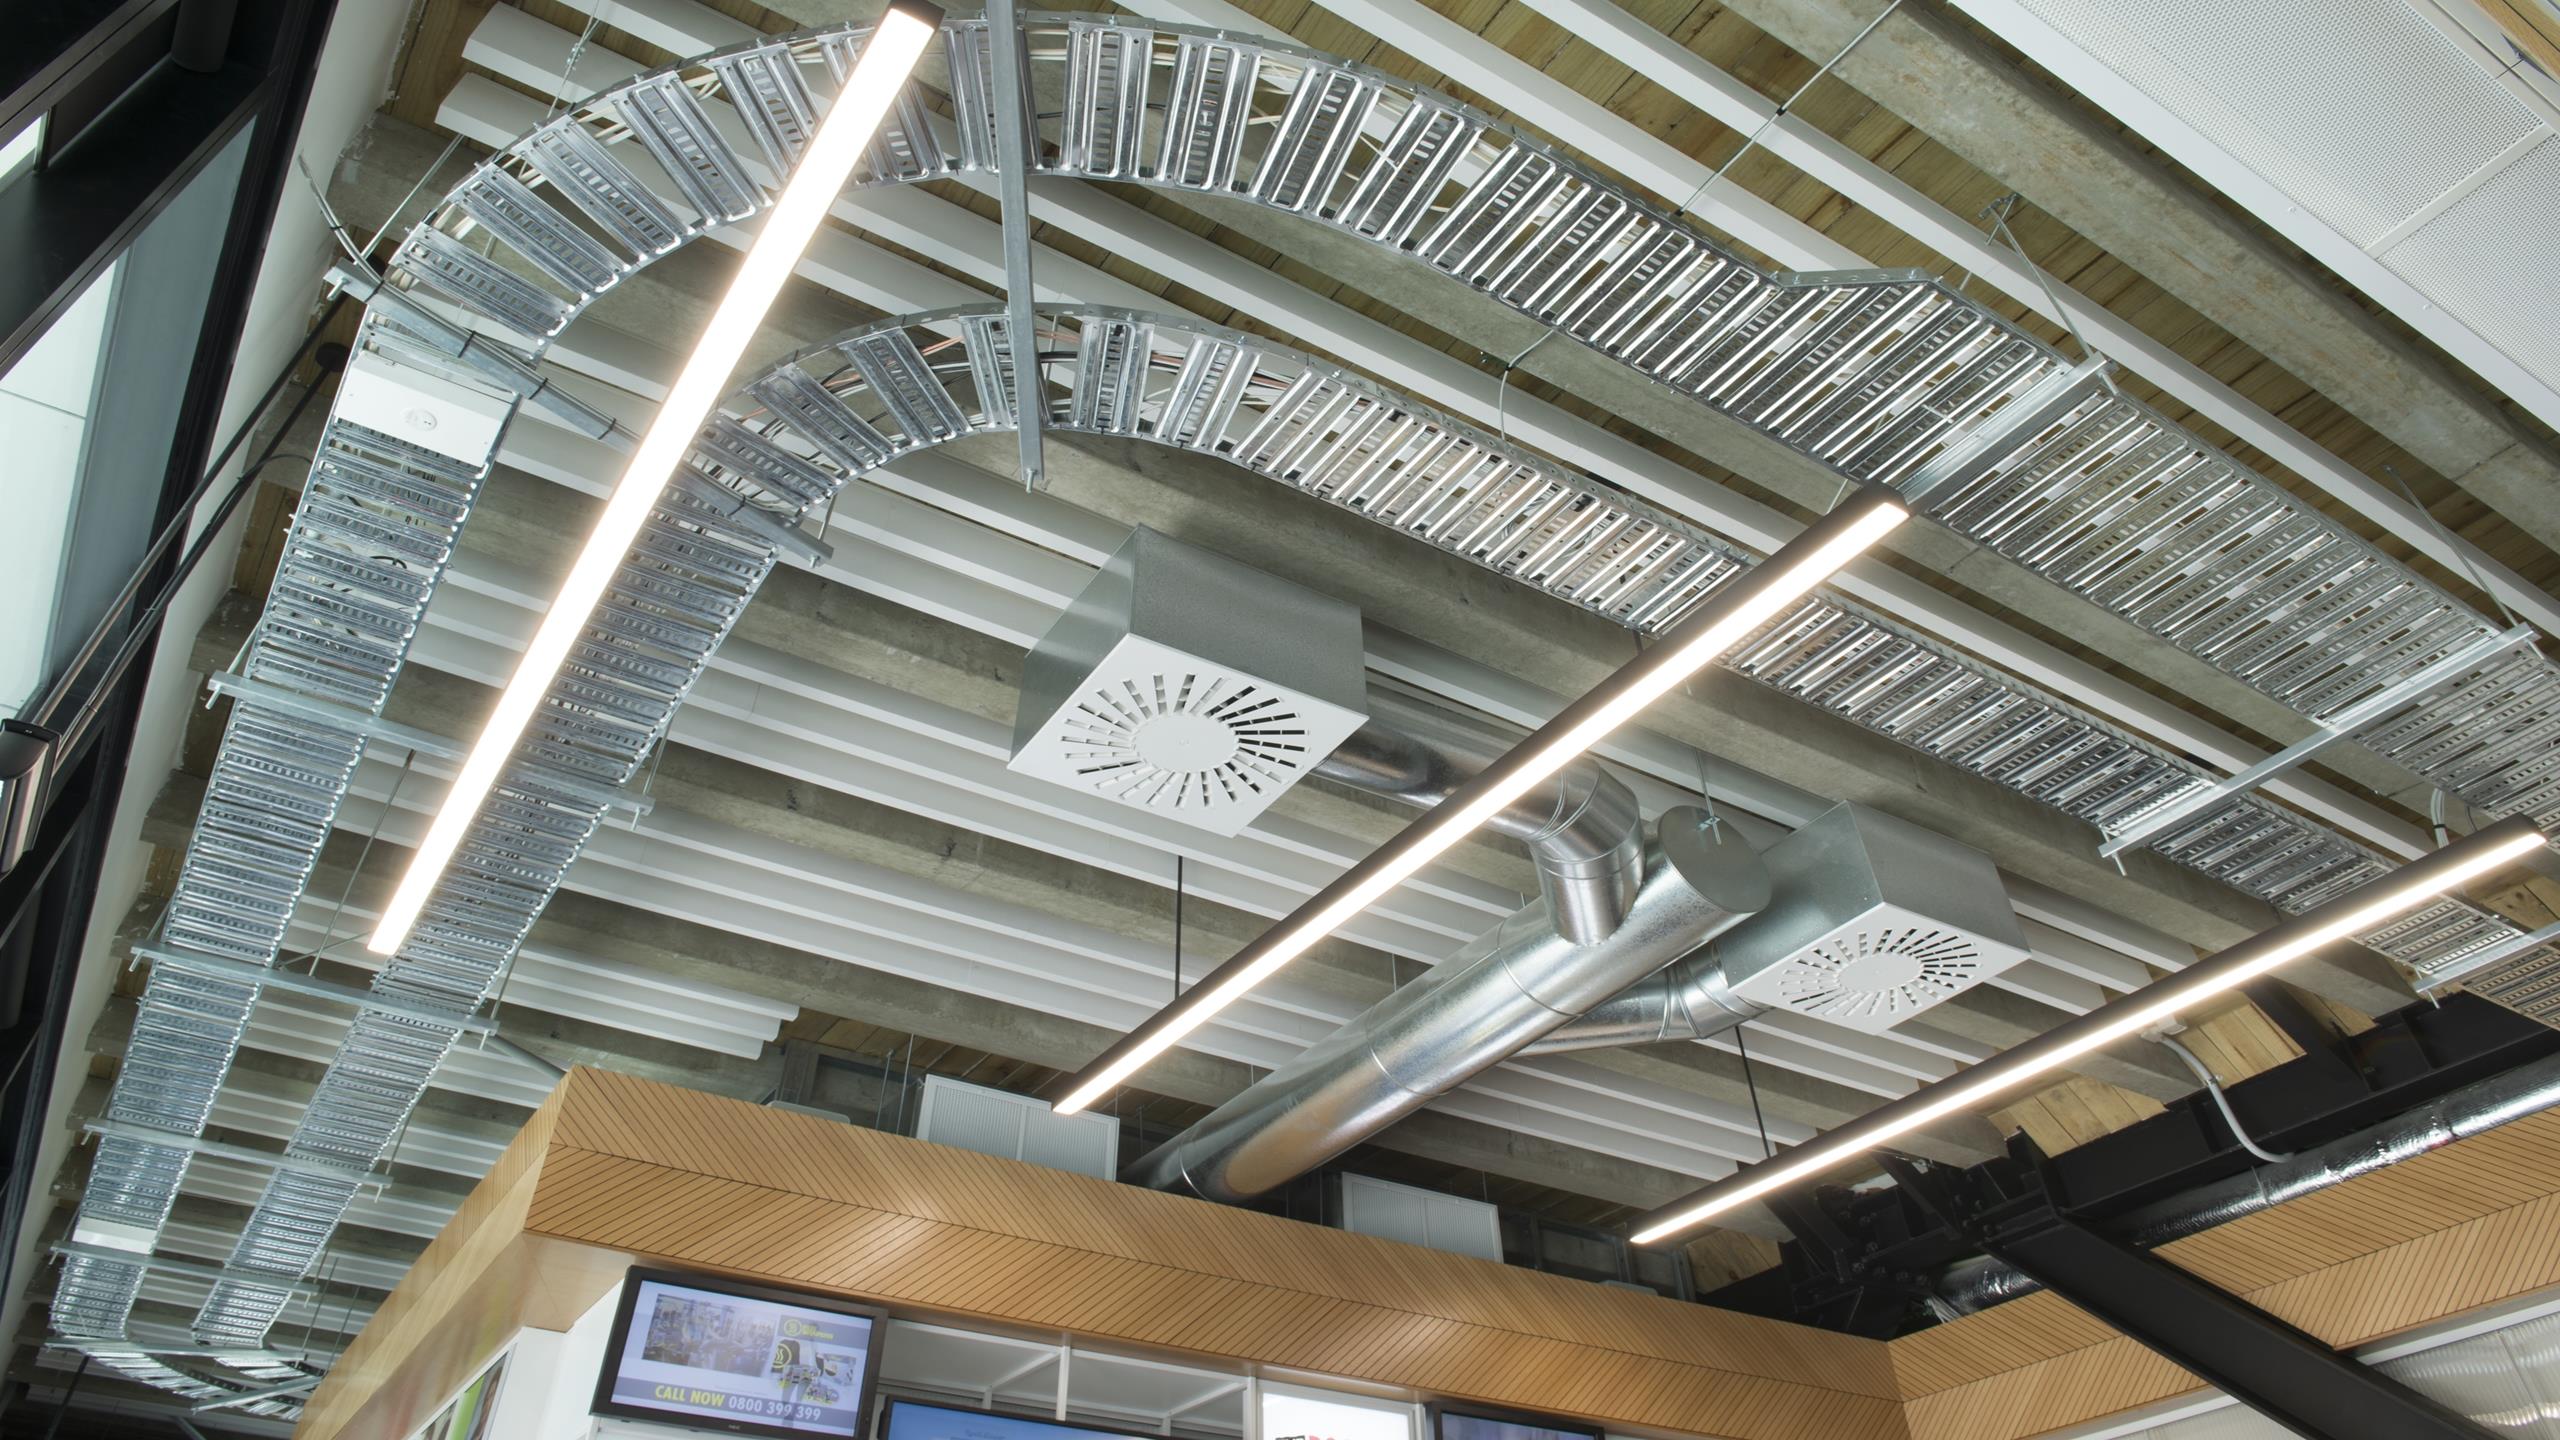 Media Works reception area showing white linear Baffle beams installed in exposed conduit ceiling plan